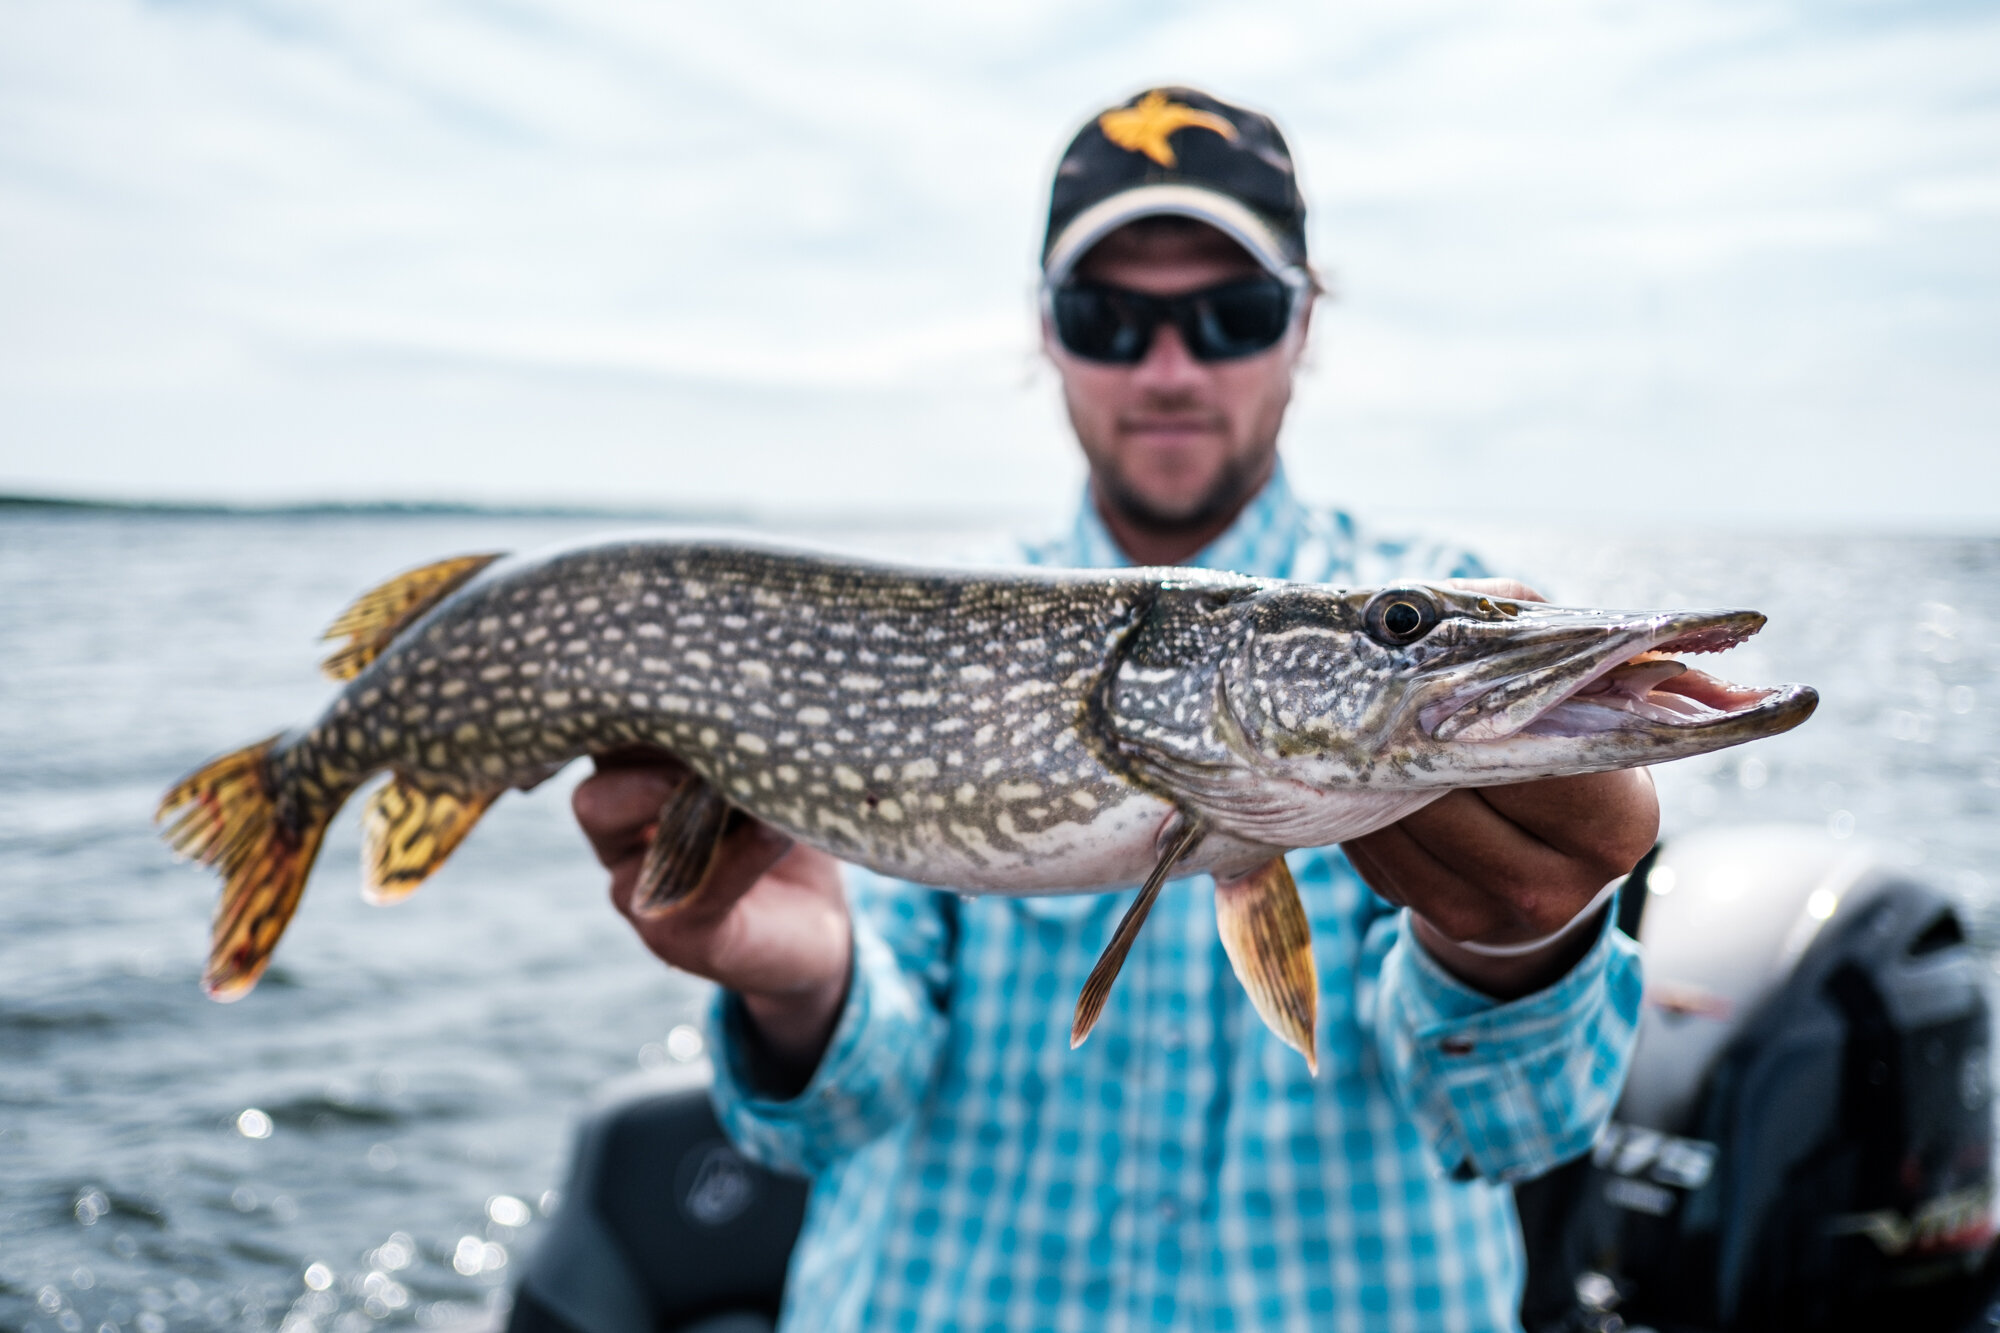 HEIG_06_2021_bowen_lodge_outdoorboundtv_low_res-0661.jpg